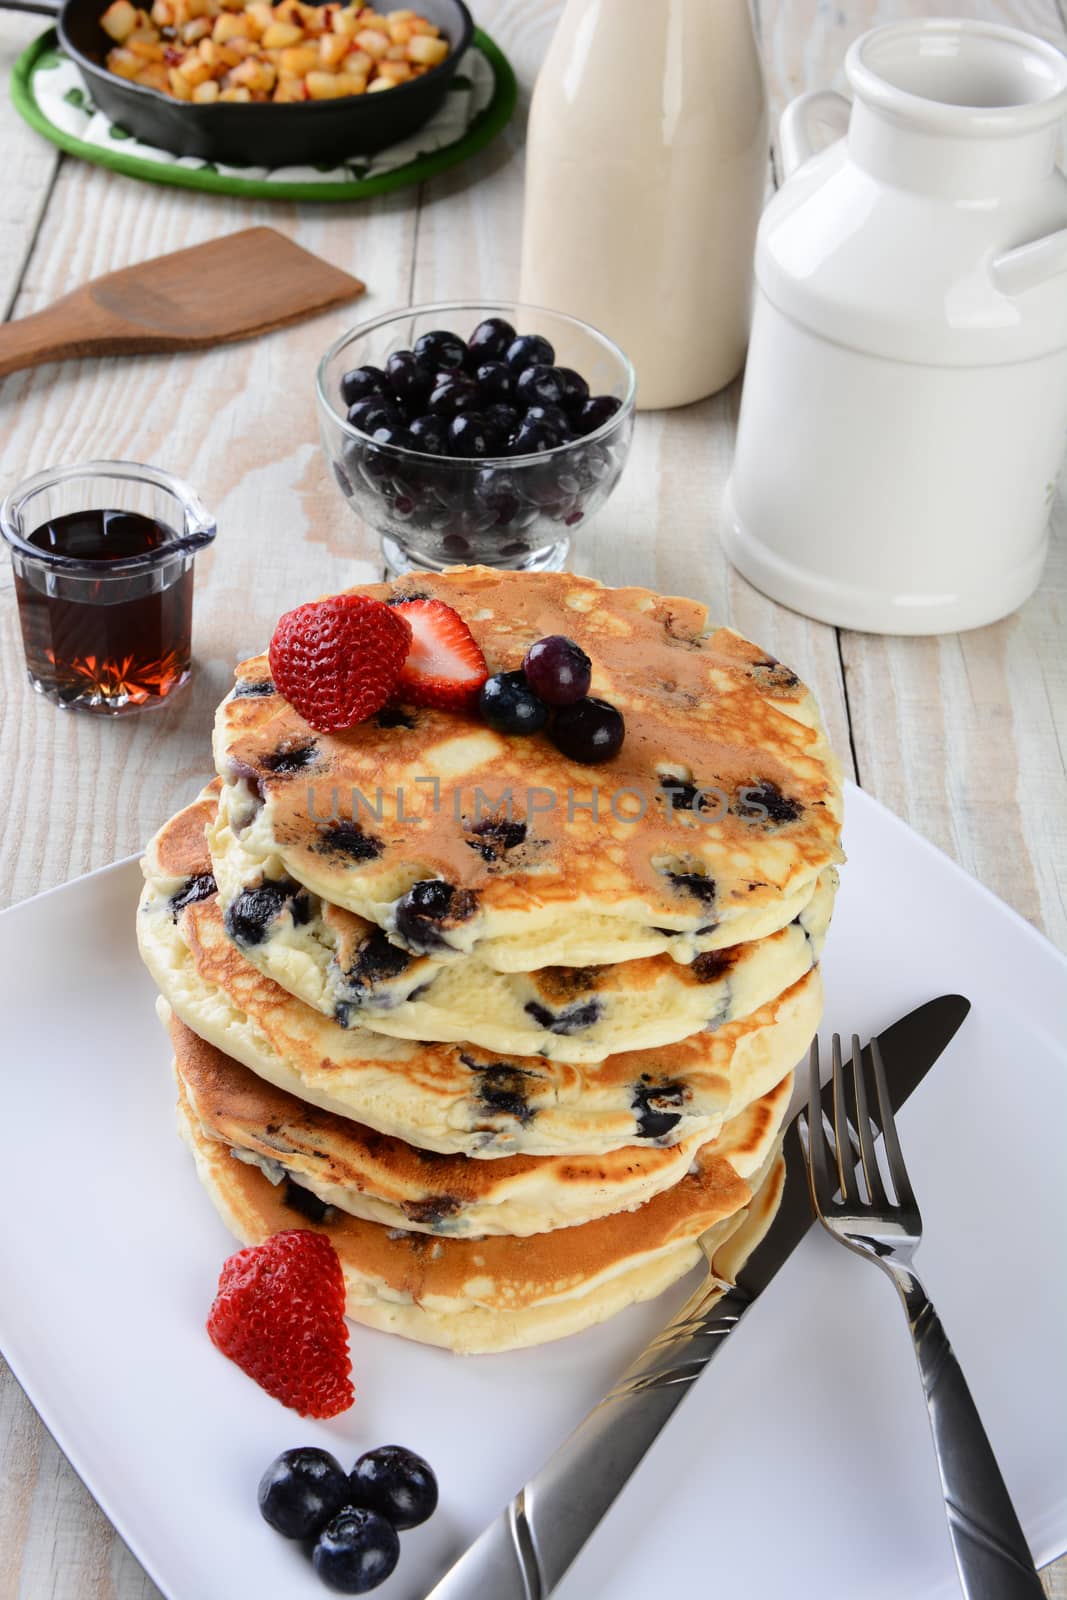 High angle shot of a stack of fresh homemade blueberry pancakes. The plate is on a rustic farmhouse style kitchen table. Other items include a syrup pitcher, knife, fork, skillet with fried potatoes, strawberries and more.